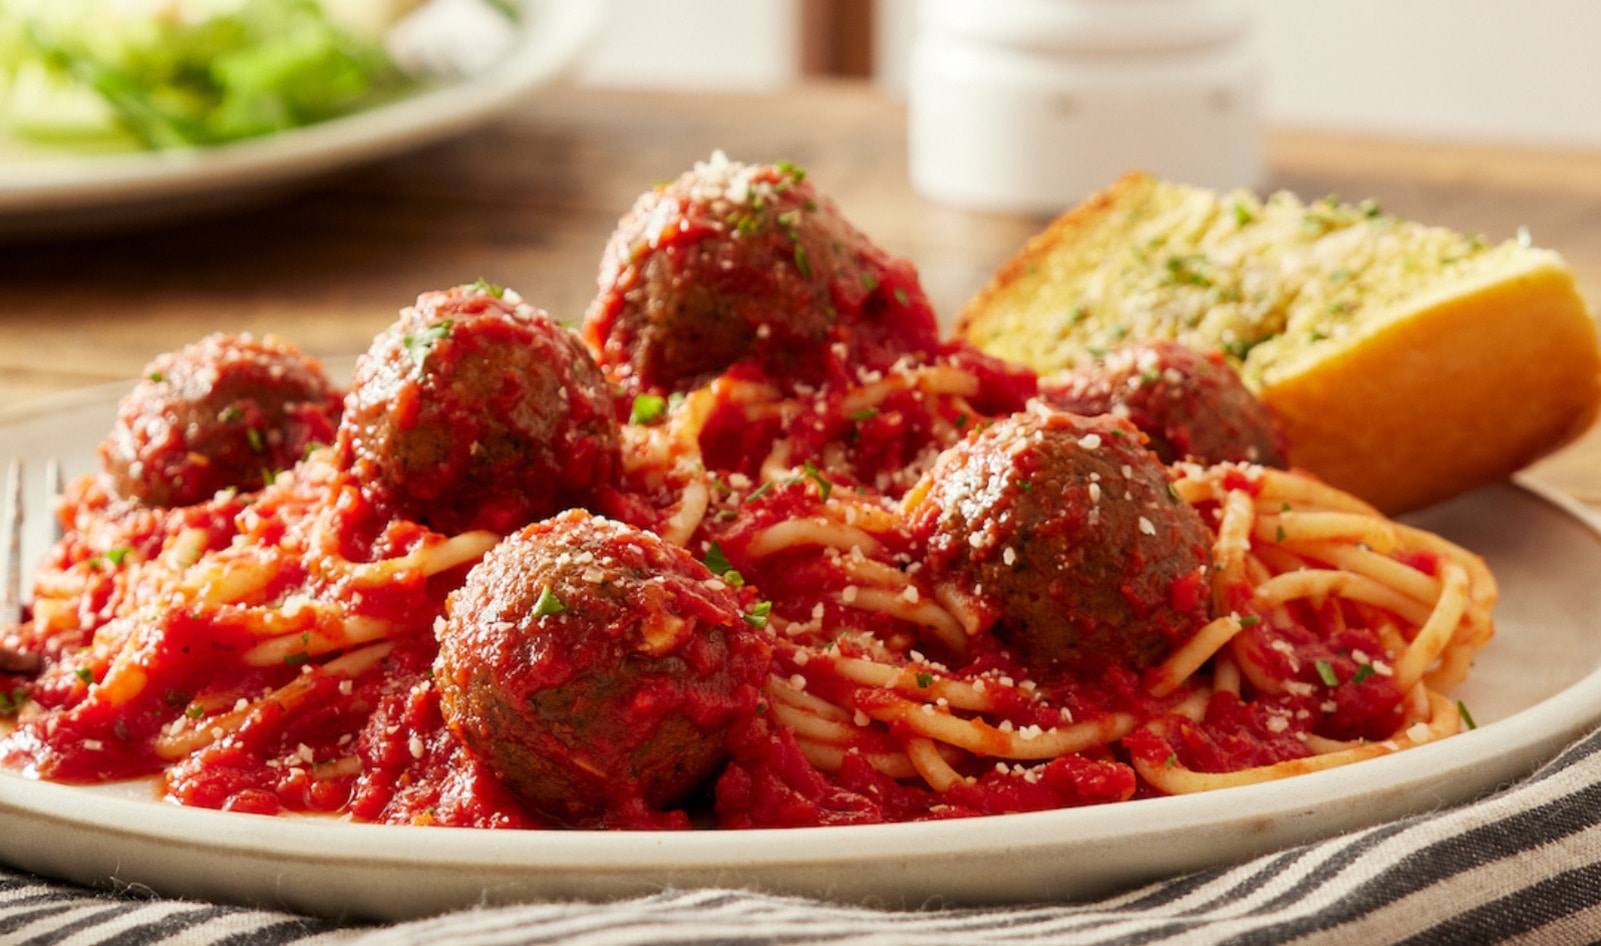 From Appetizers to Pasta Night: Stock Up On These 7 Vegan Meatballs